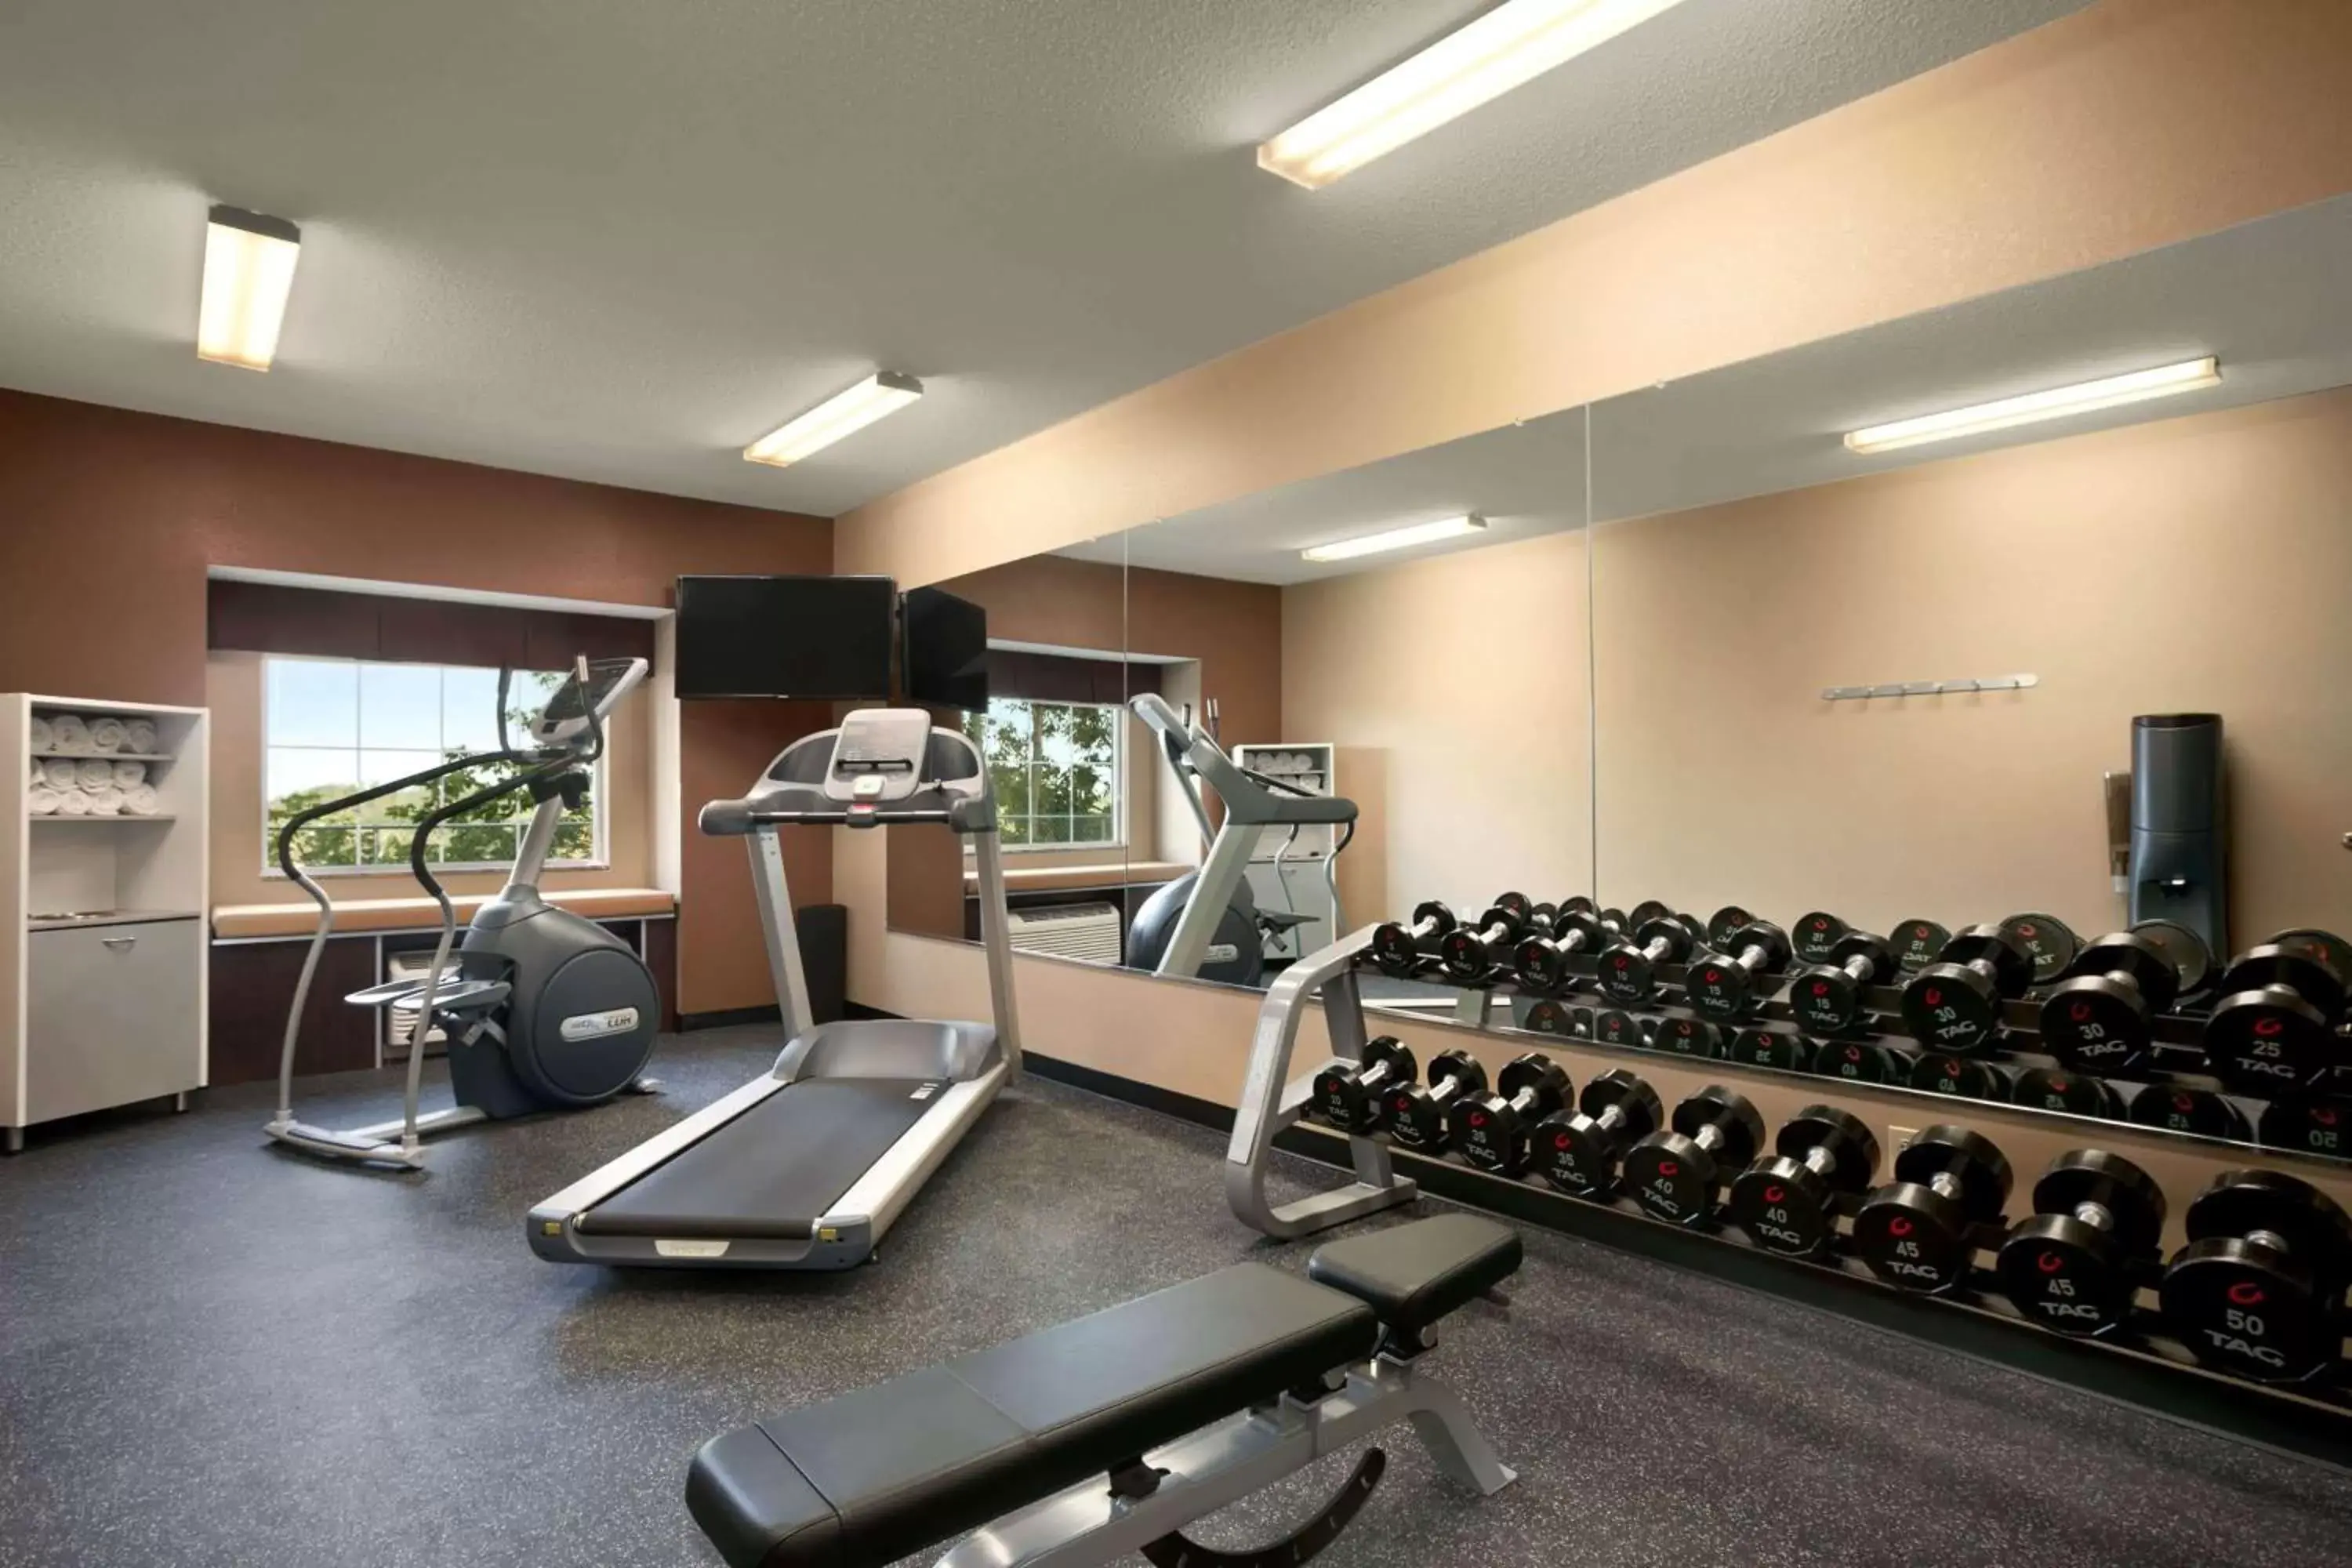 Fitness centre/facilities, Fitness Center/Facilities in Microtel Inn & Suites - St Clairsville